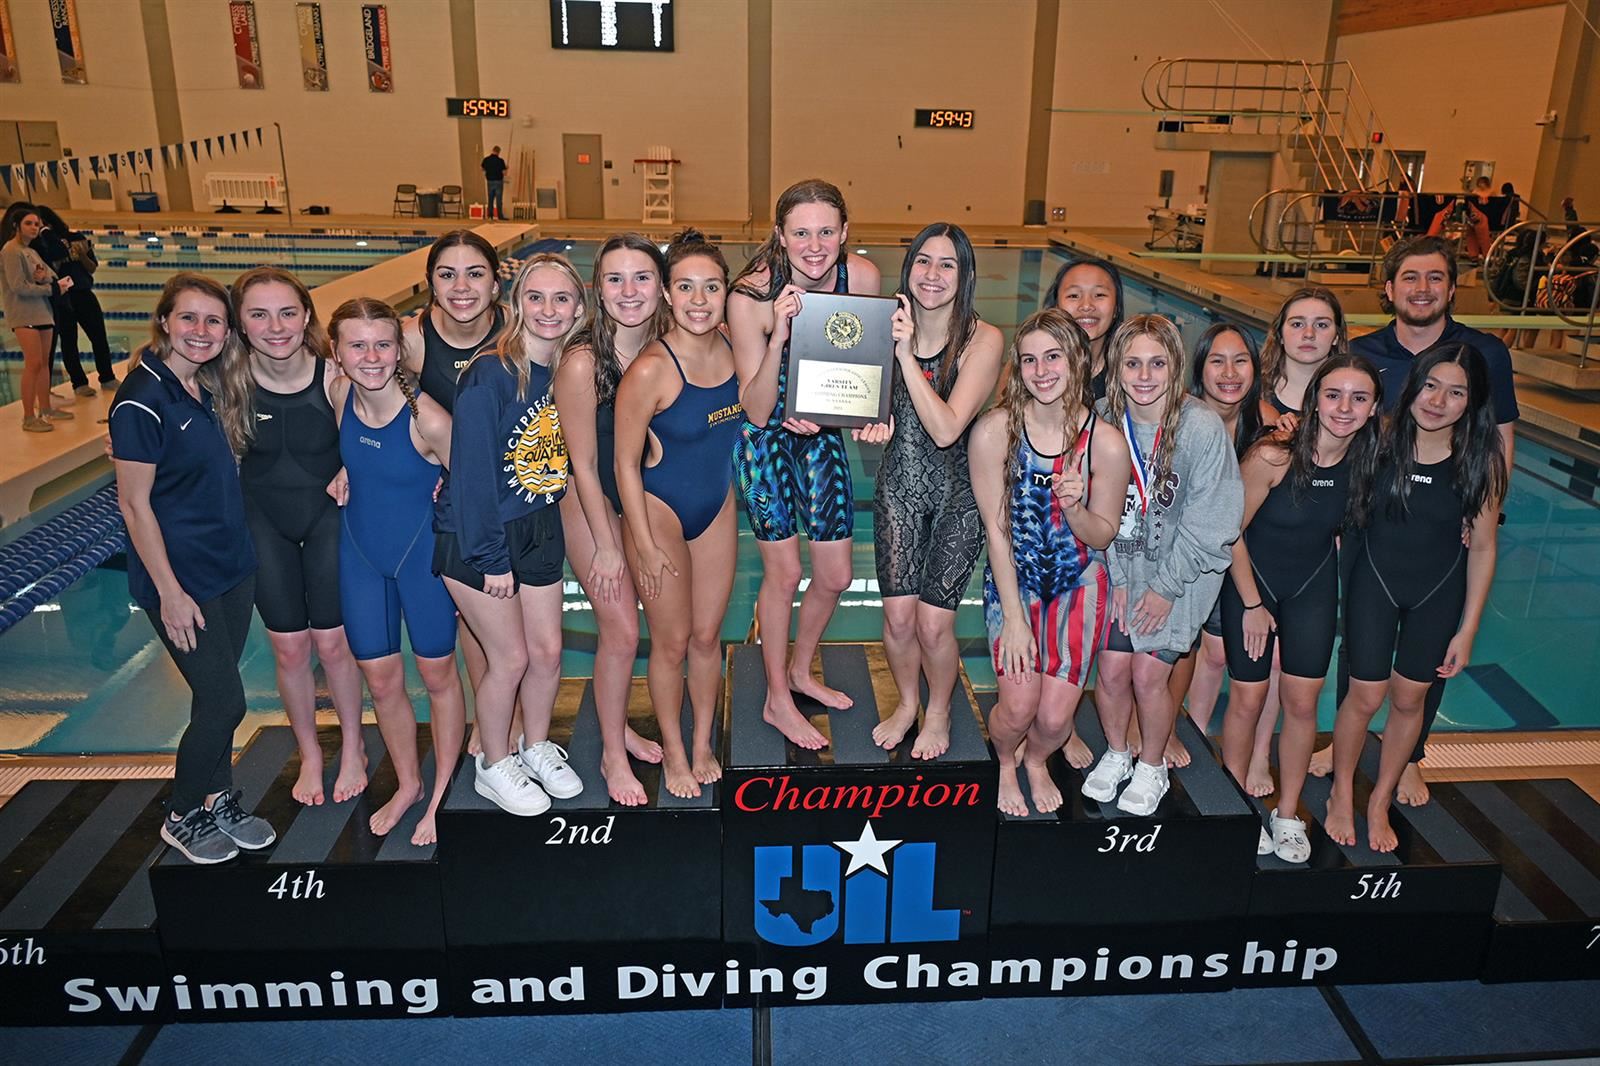 The Cypress Ranch High School girls’ swim team won the District 18-6A team championship, winning the title with 177 points. 